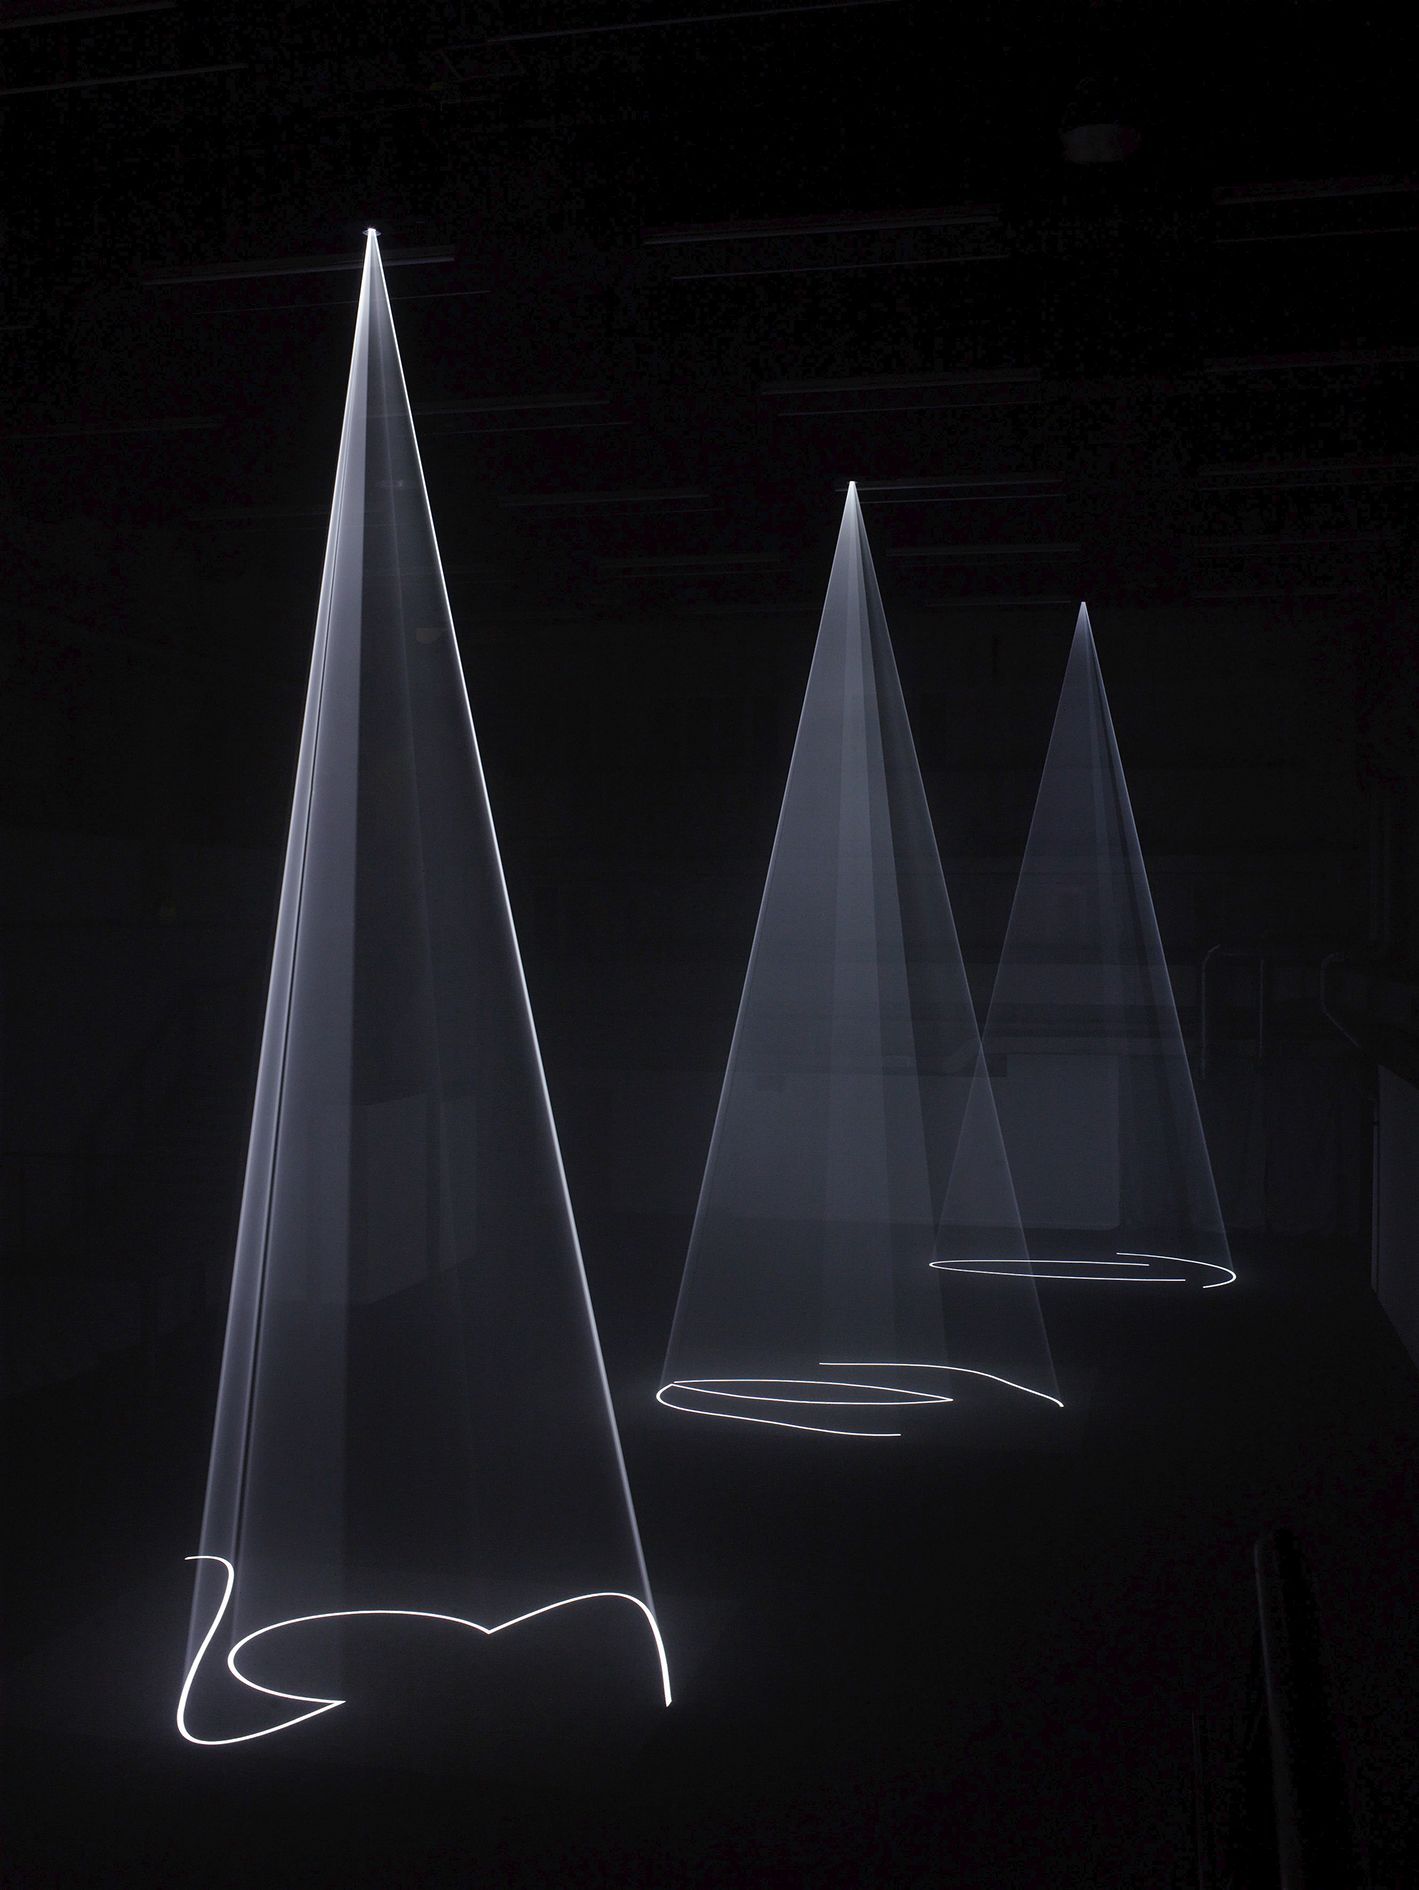 Anthony McCall – Vertical Works – Sprüth Magers at Ambika P3, University of Westminster